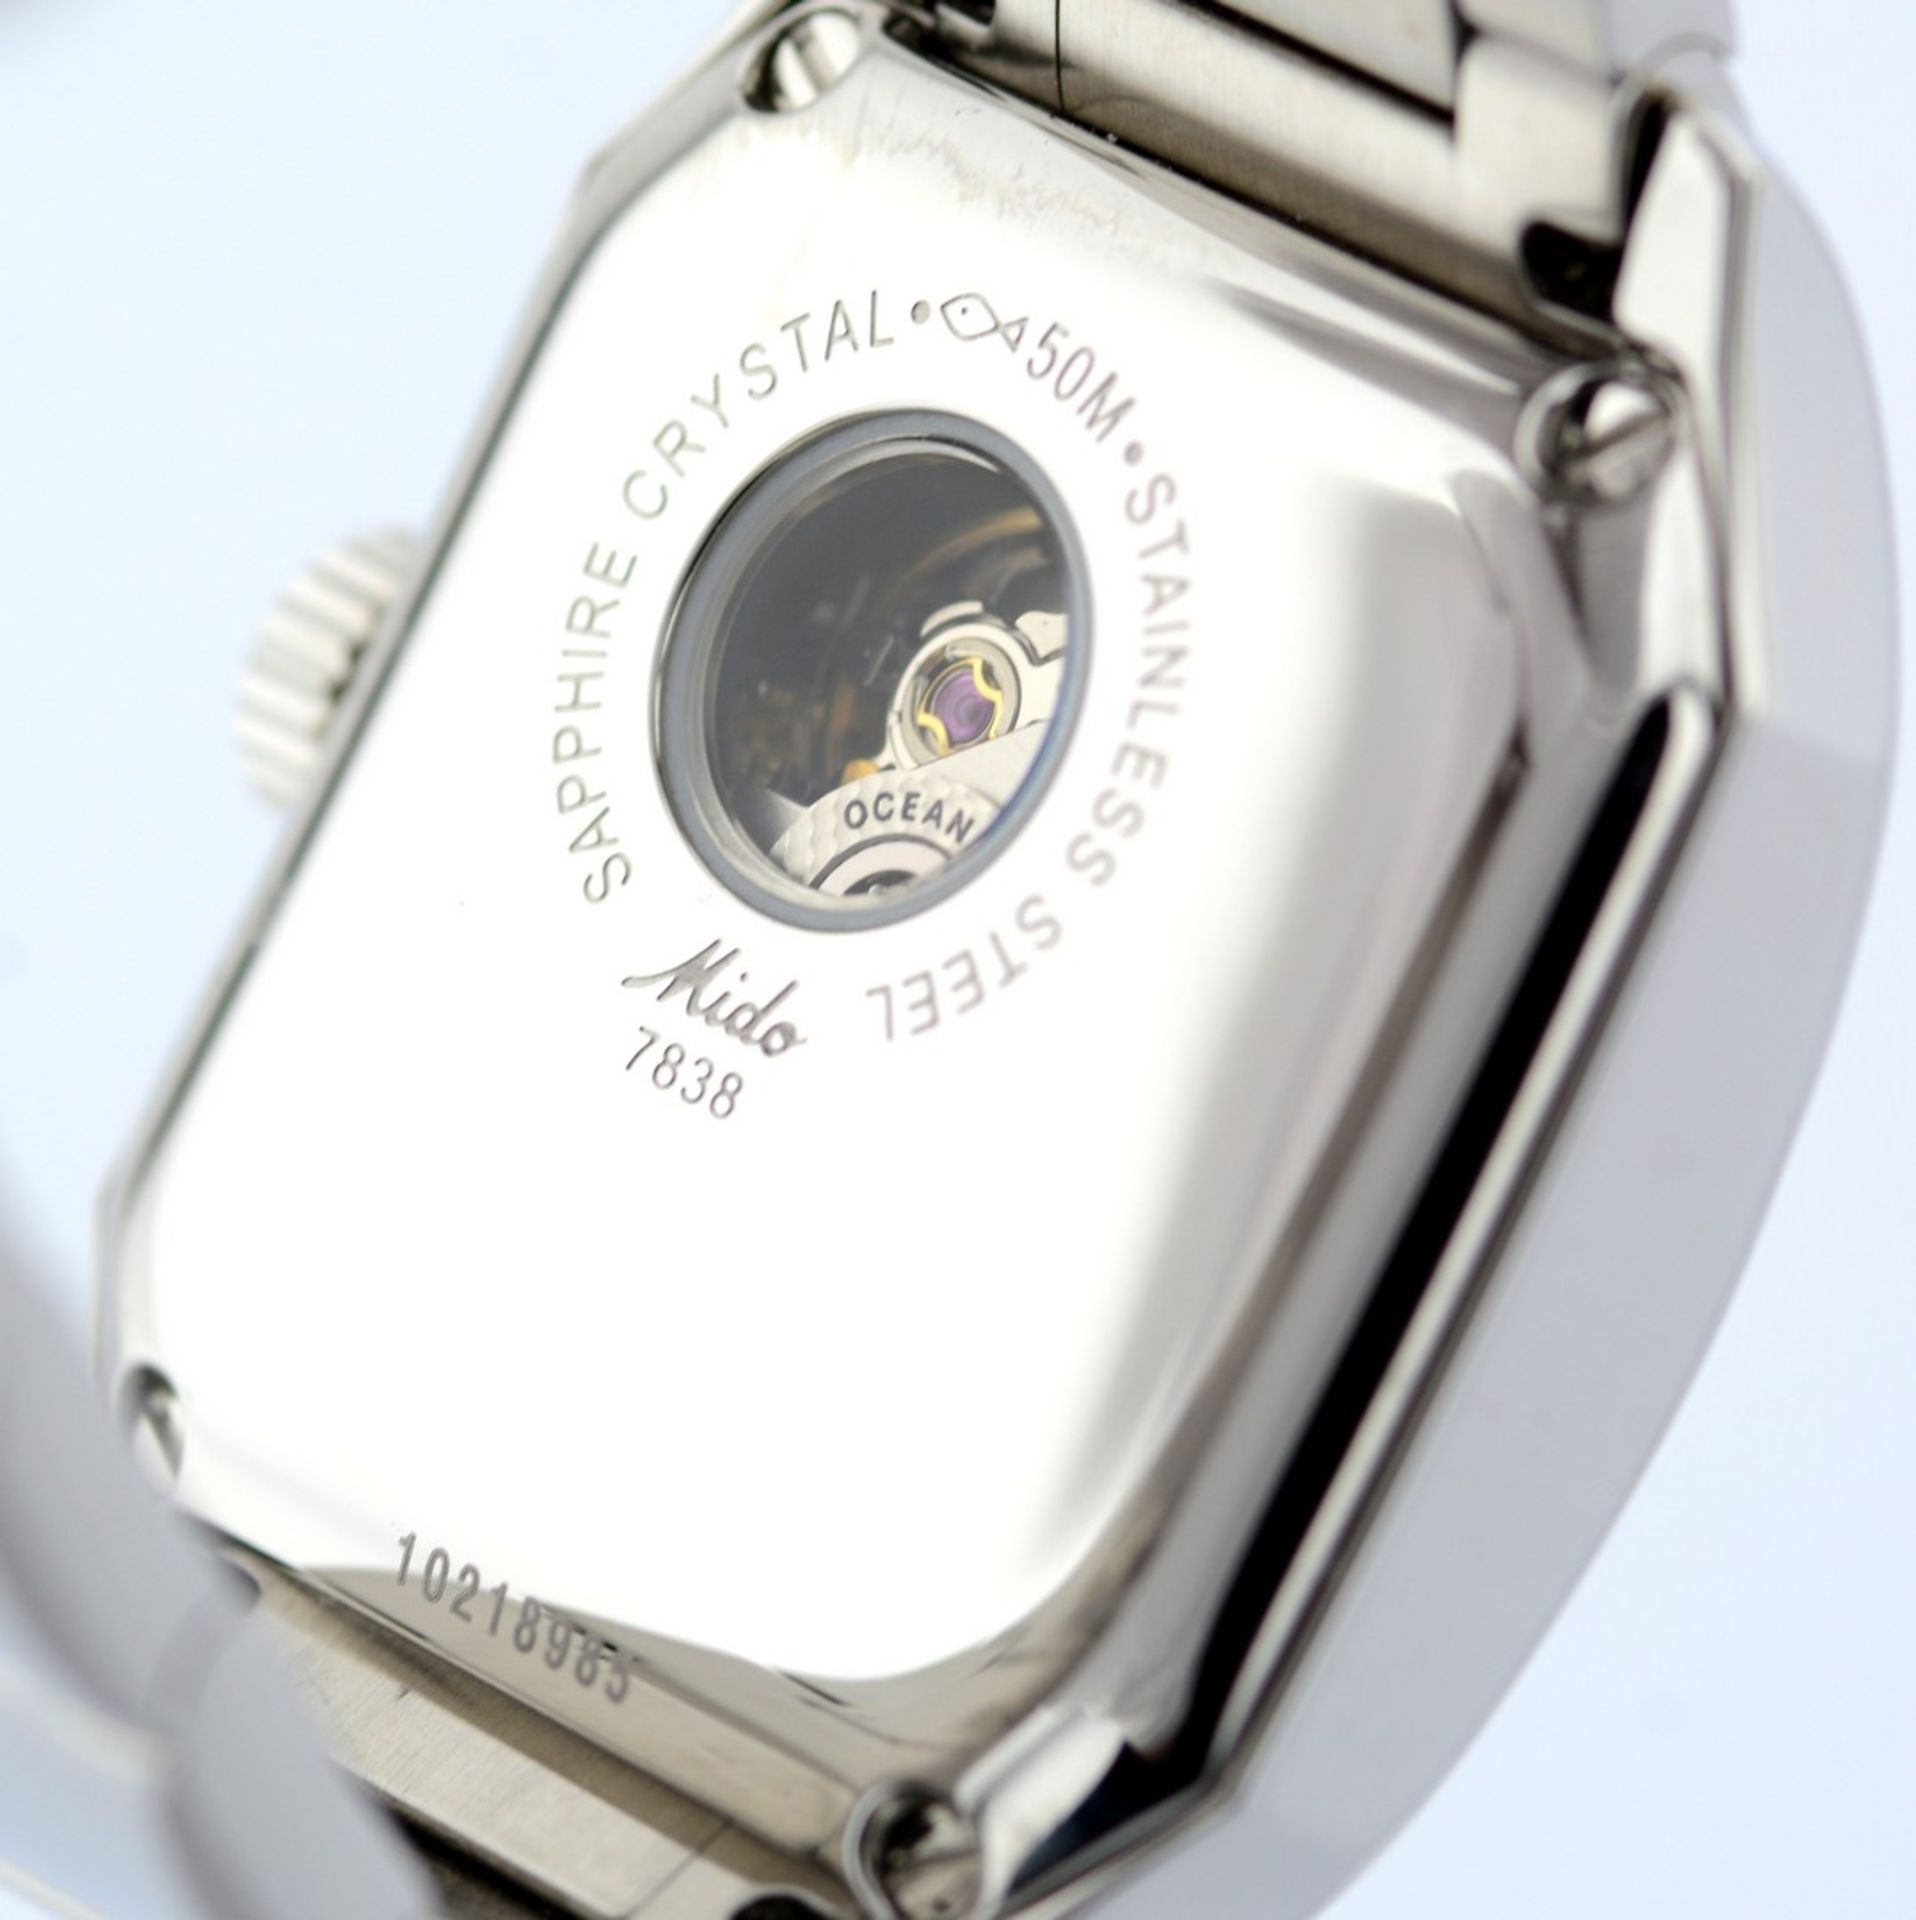 Mido / Ocean Star Diamond - Mother of Pearl Automatic Date - Lady's Steel Wrist Watch - Image 5 of 7